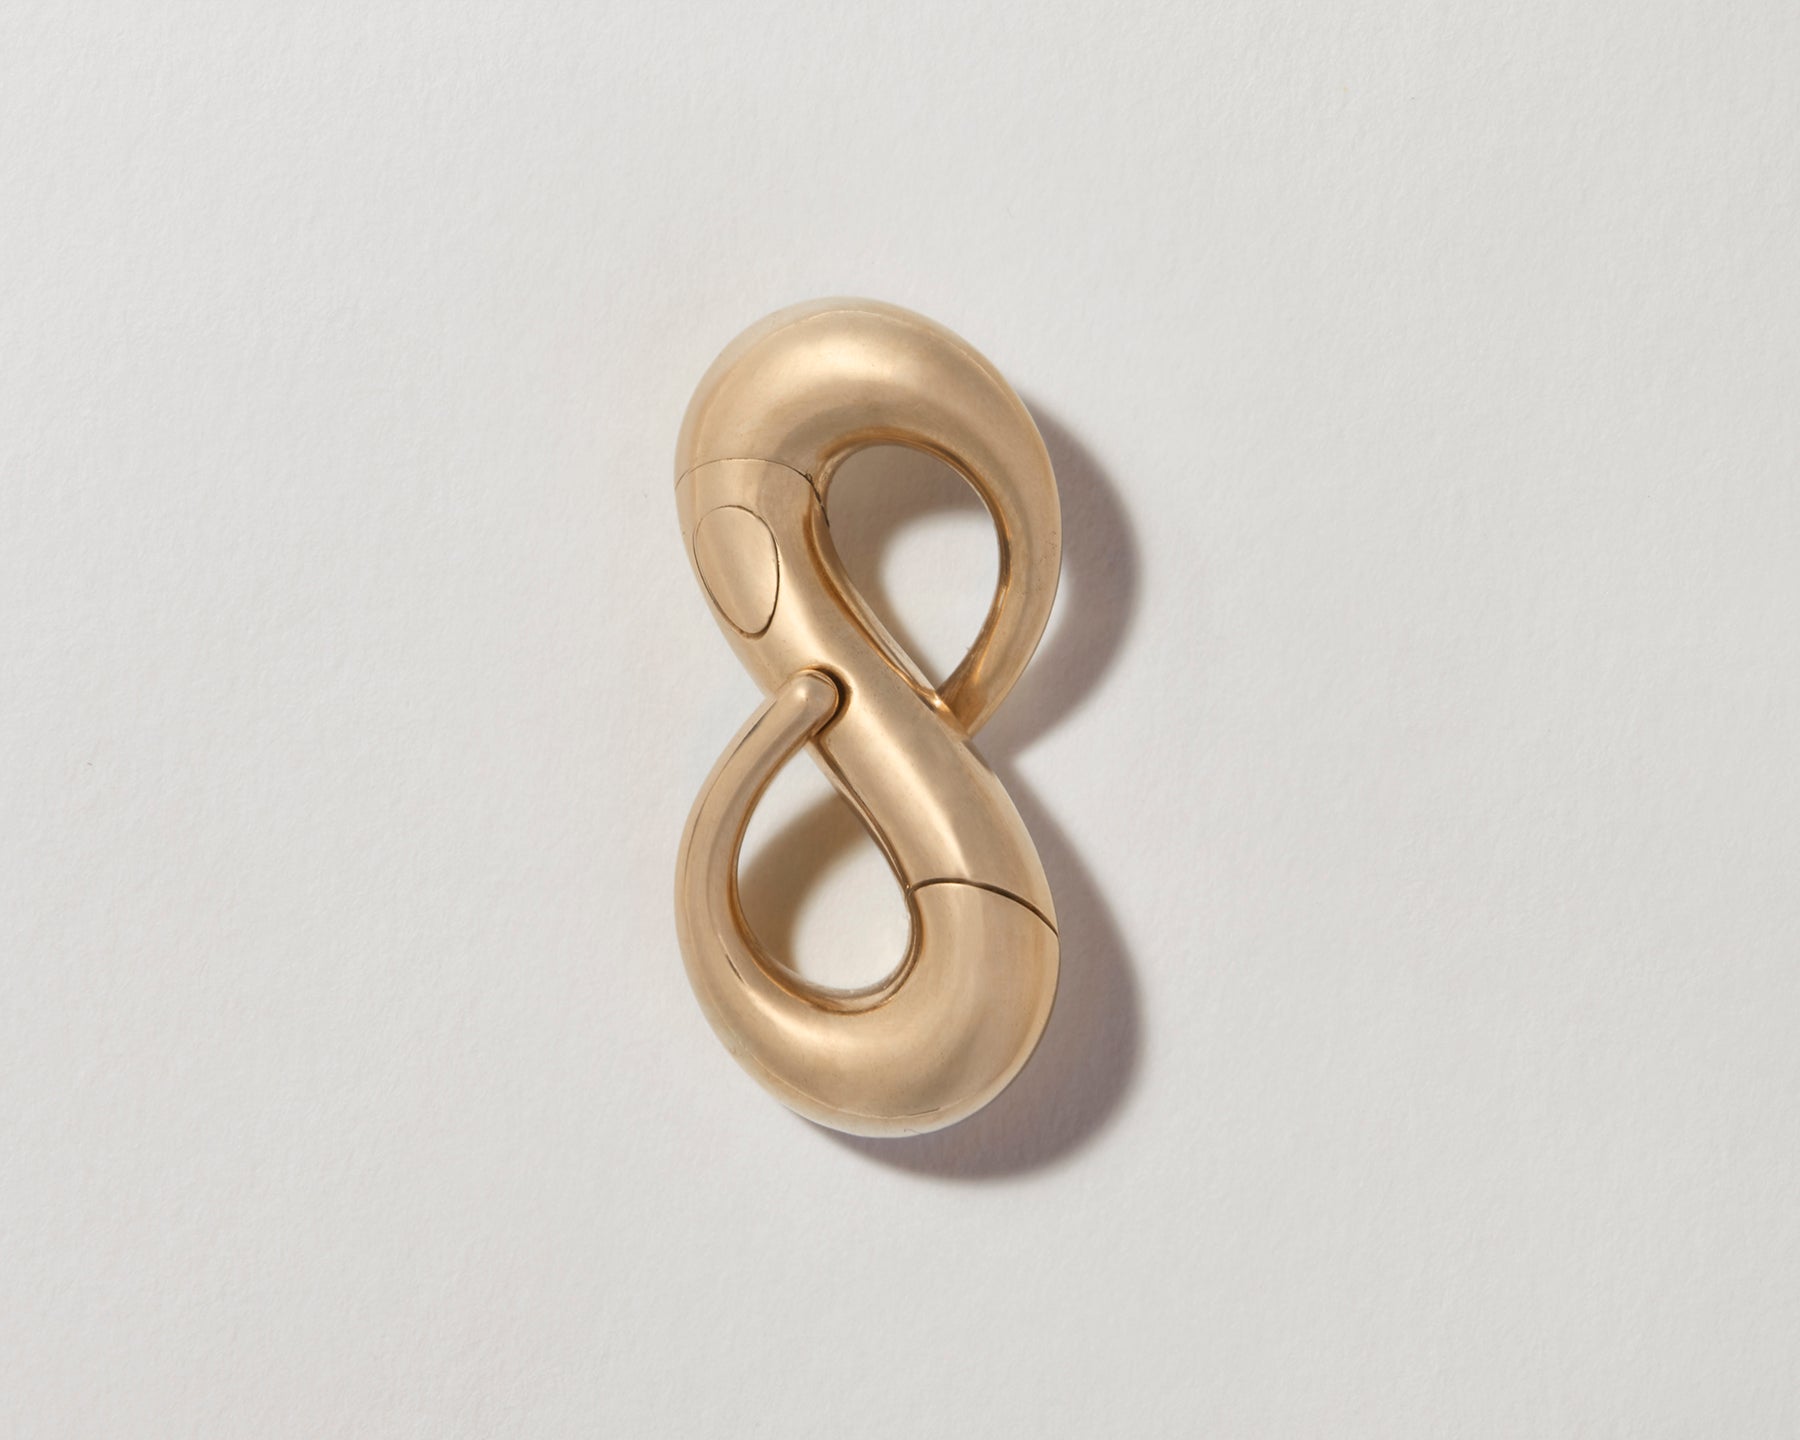 Gold infinity lock with clasp closed against gray backdrop